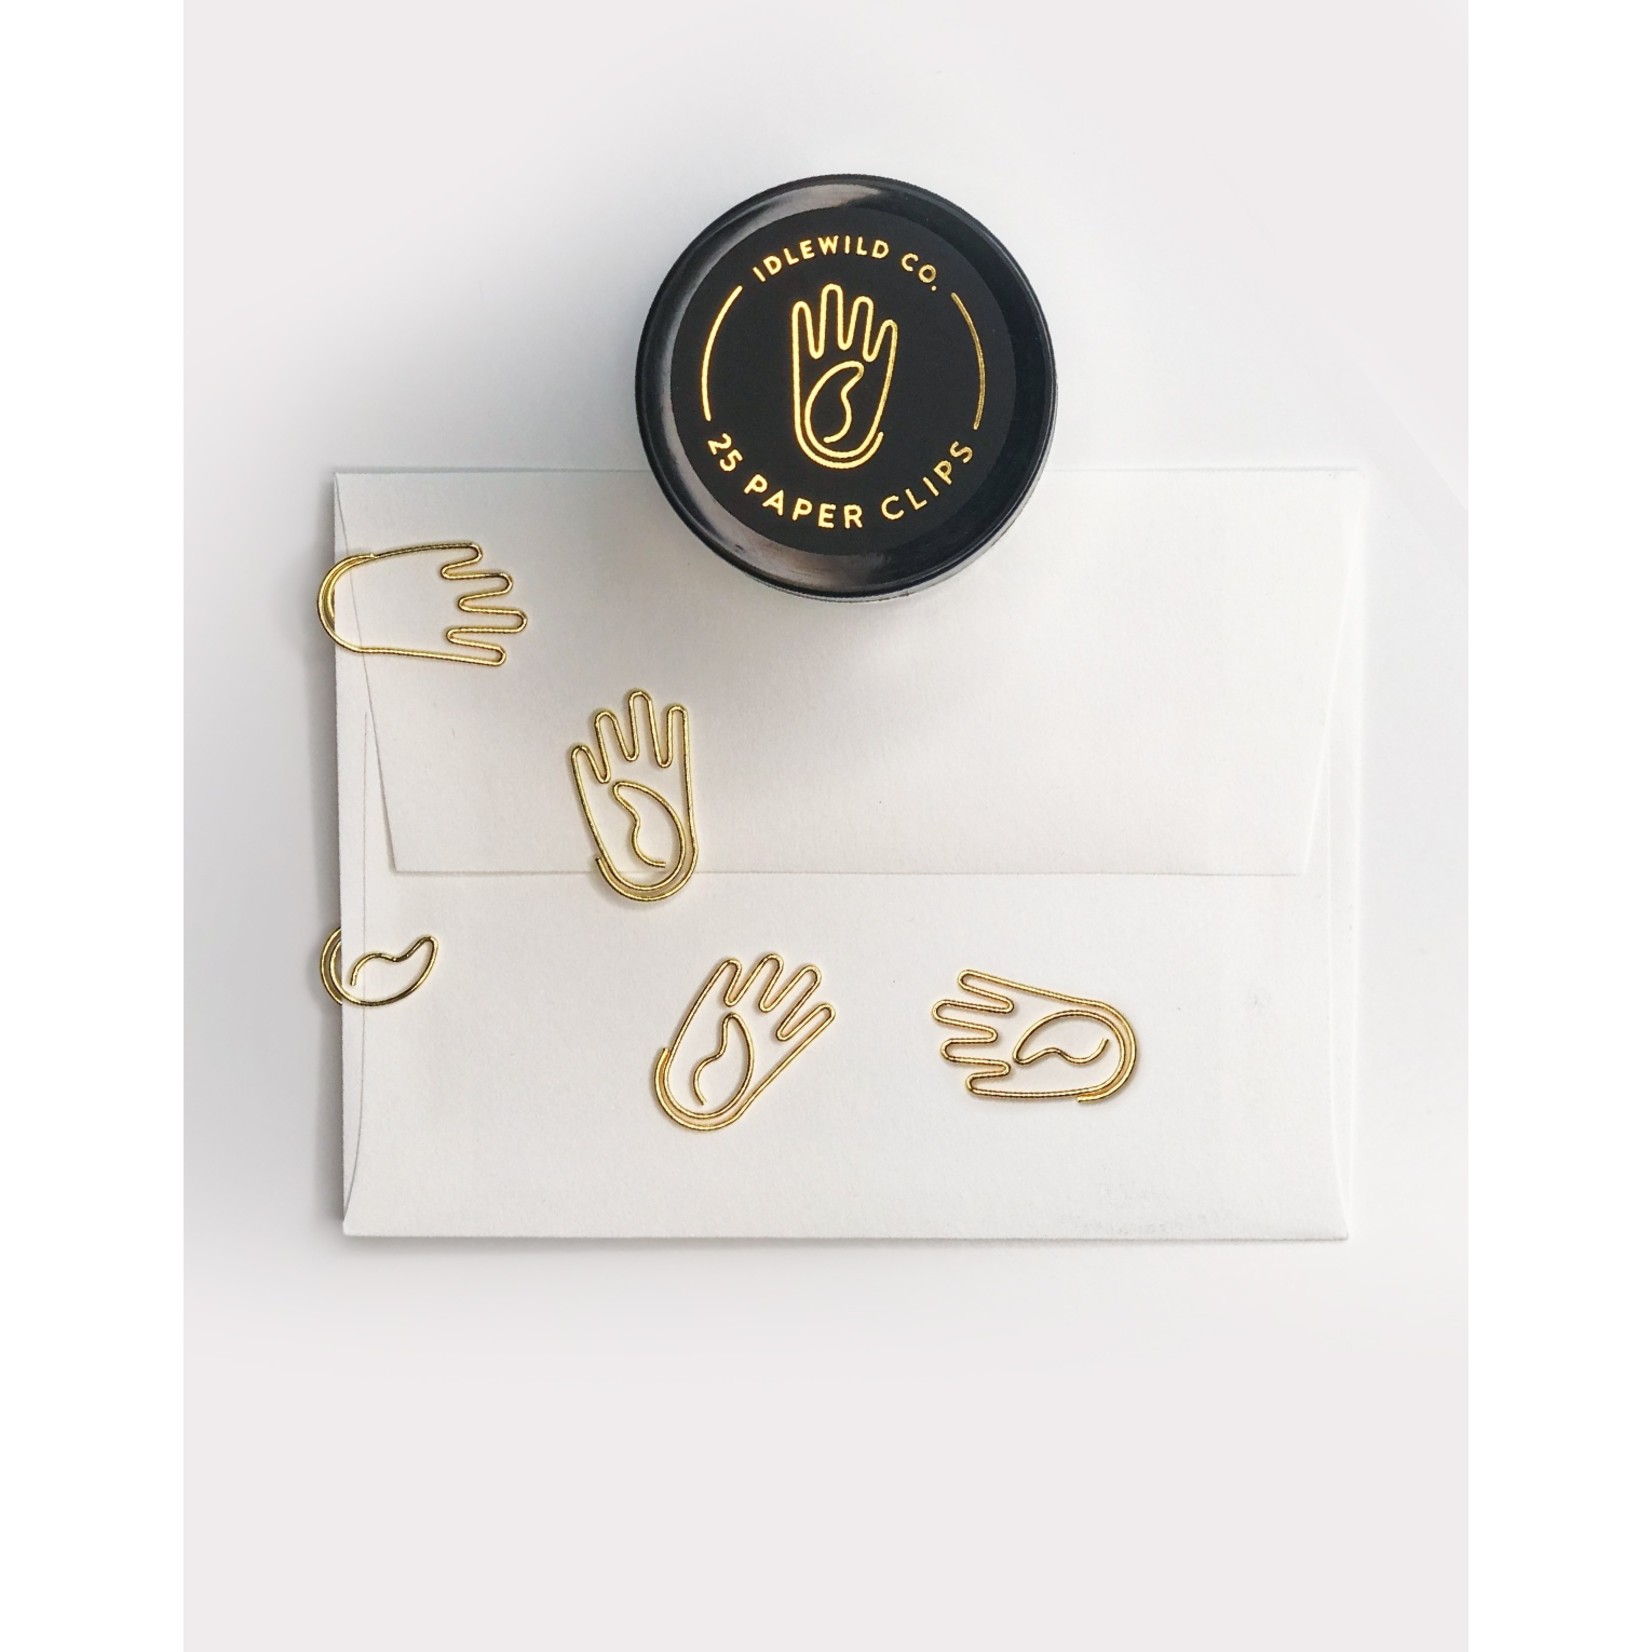 Idlewild Co. Hand Gold Plated Paper Clips